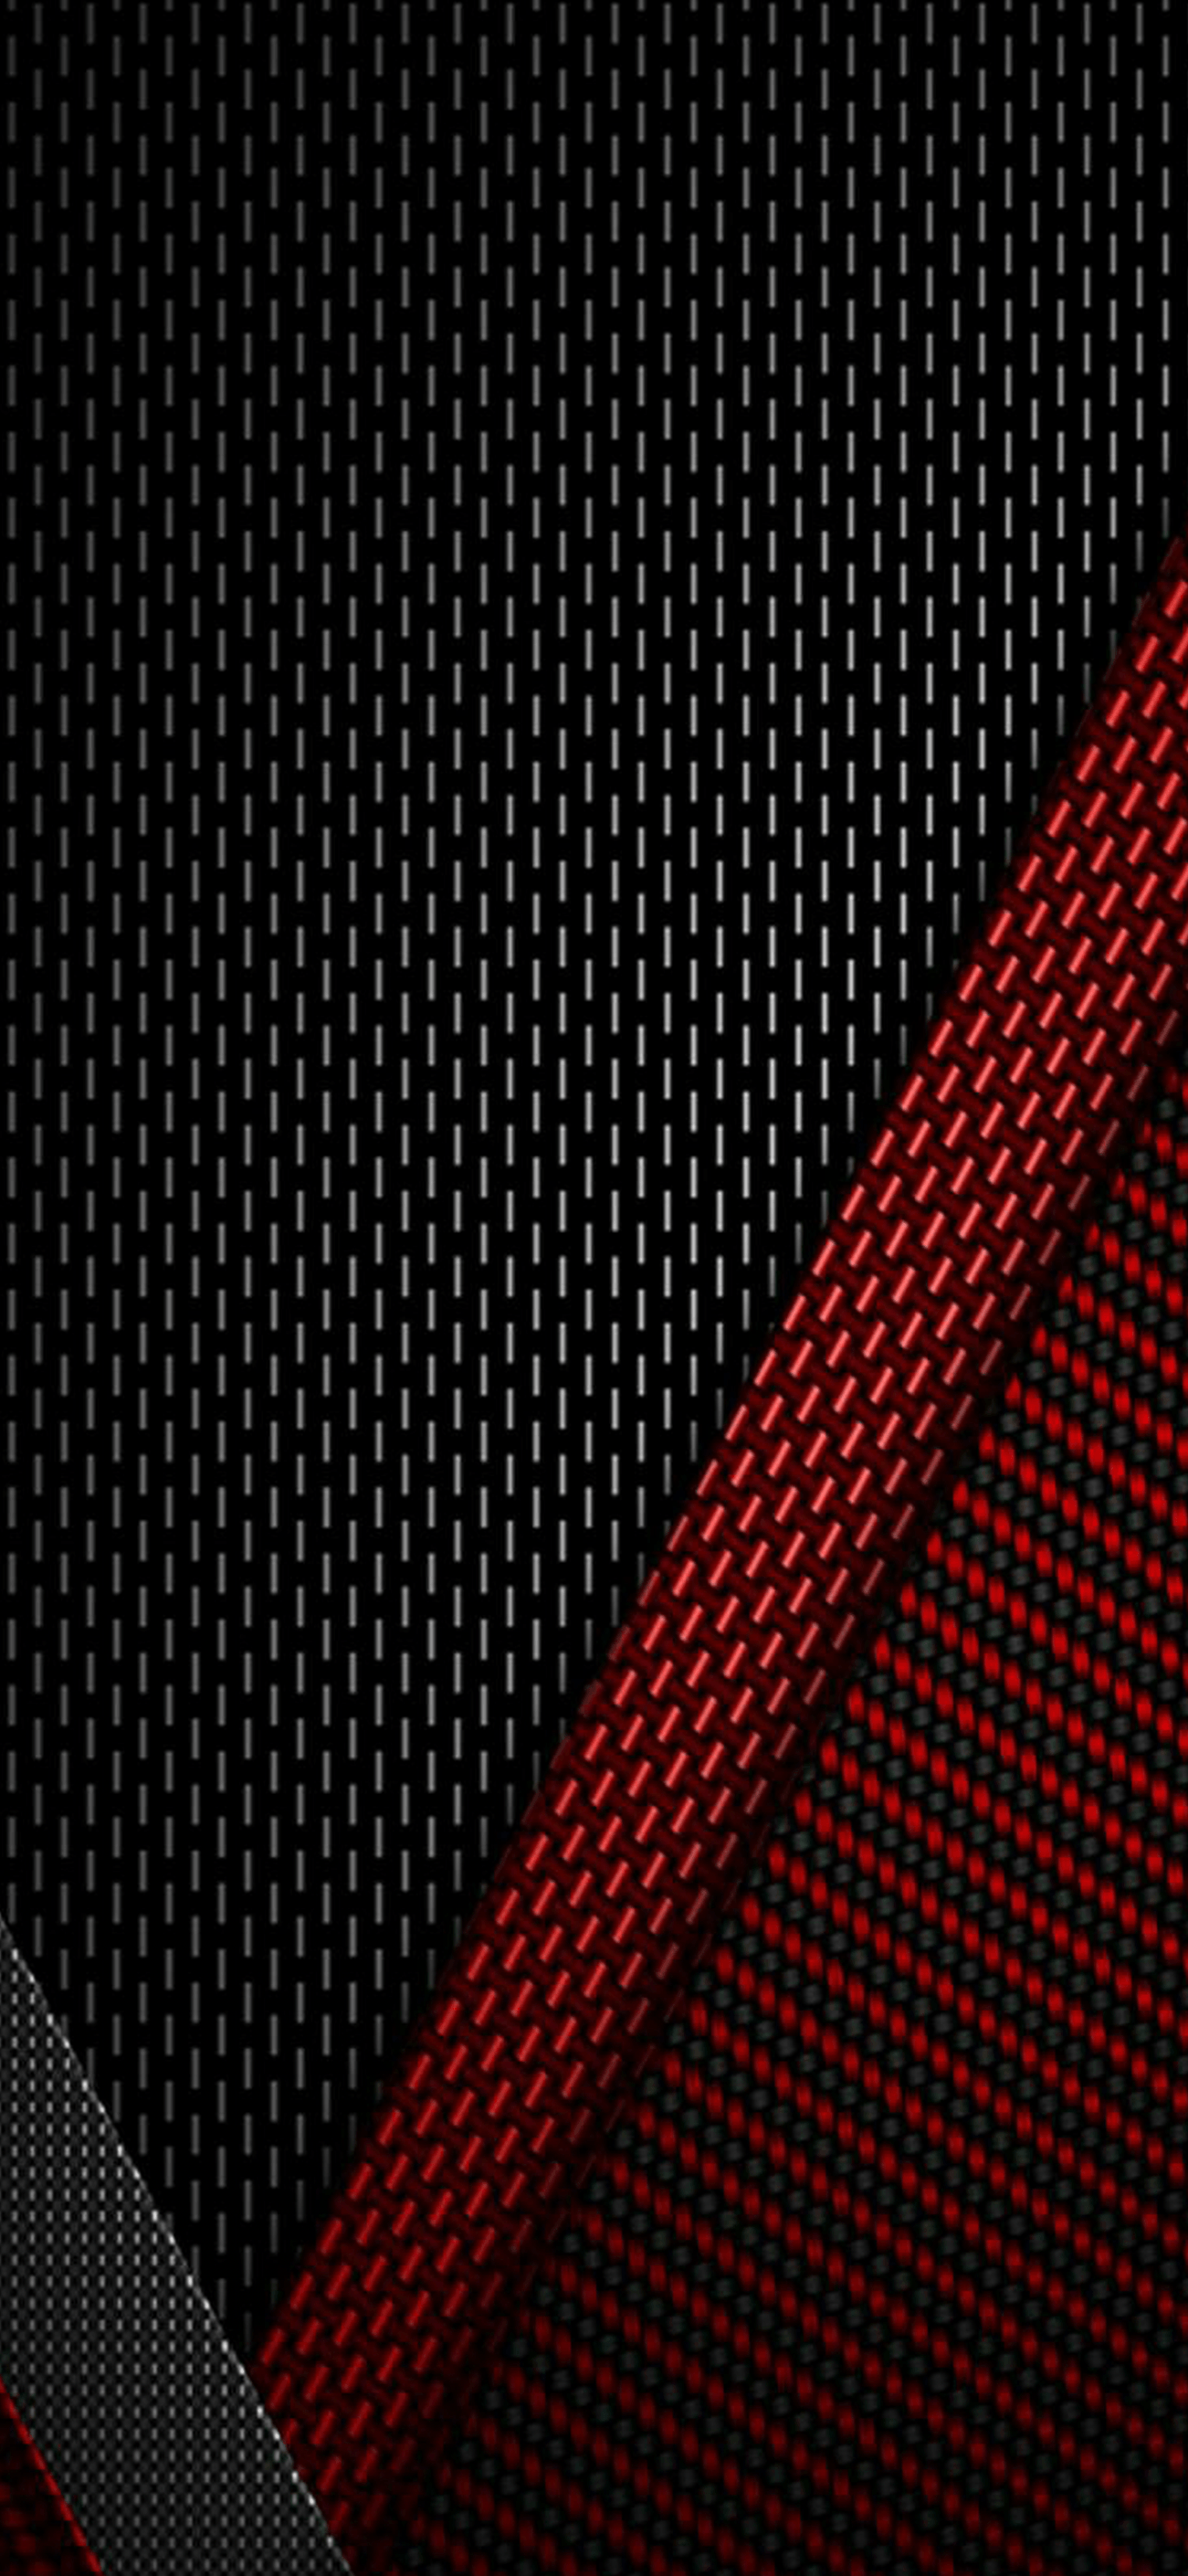 Red And Black Iphone Wallpapers